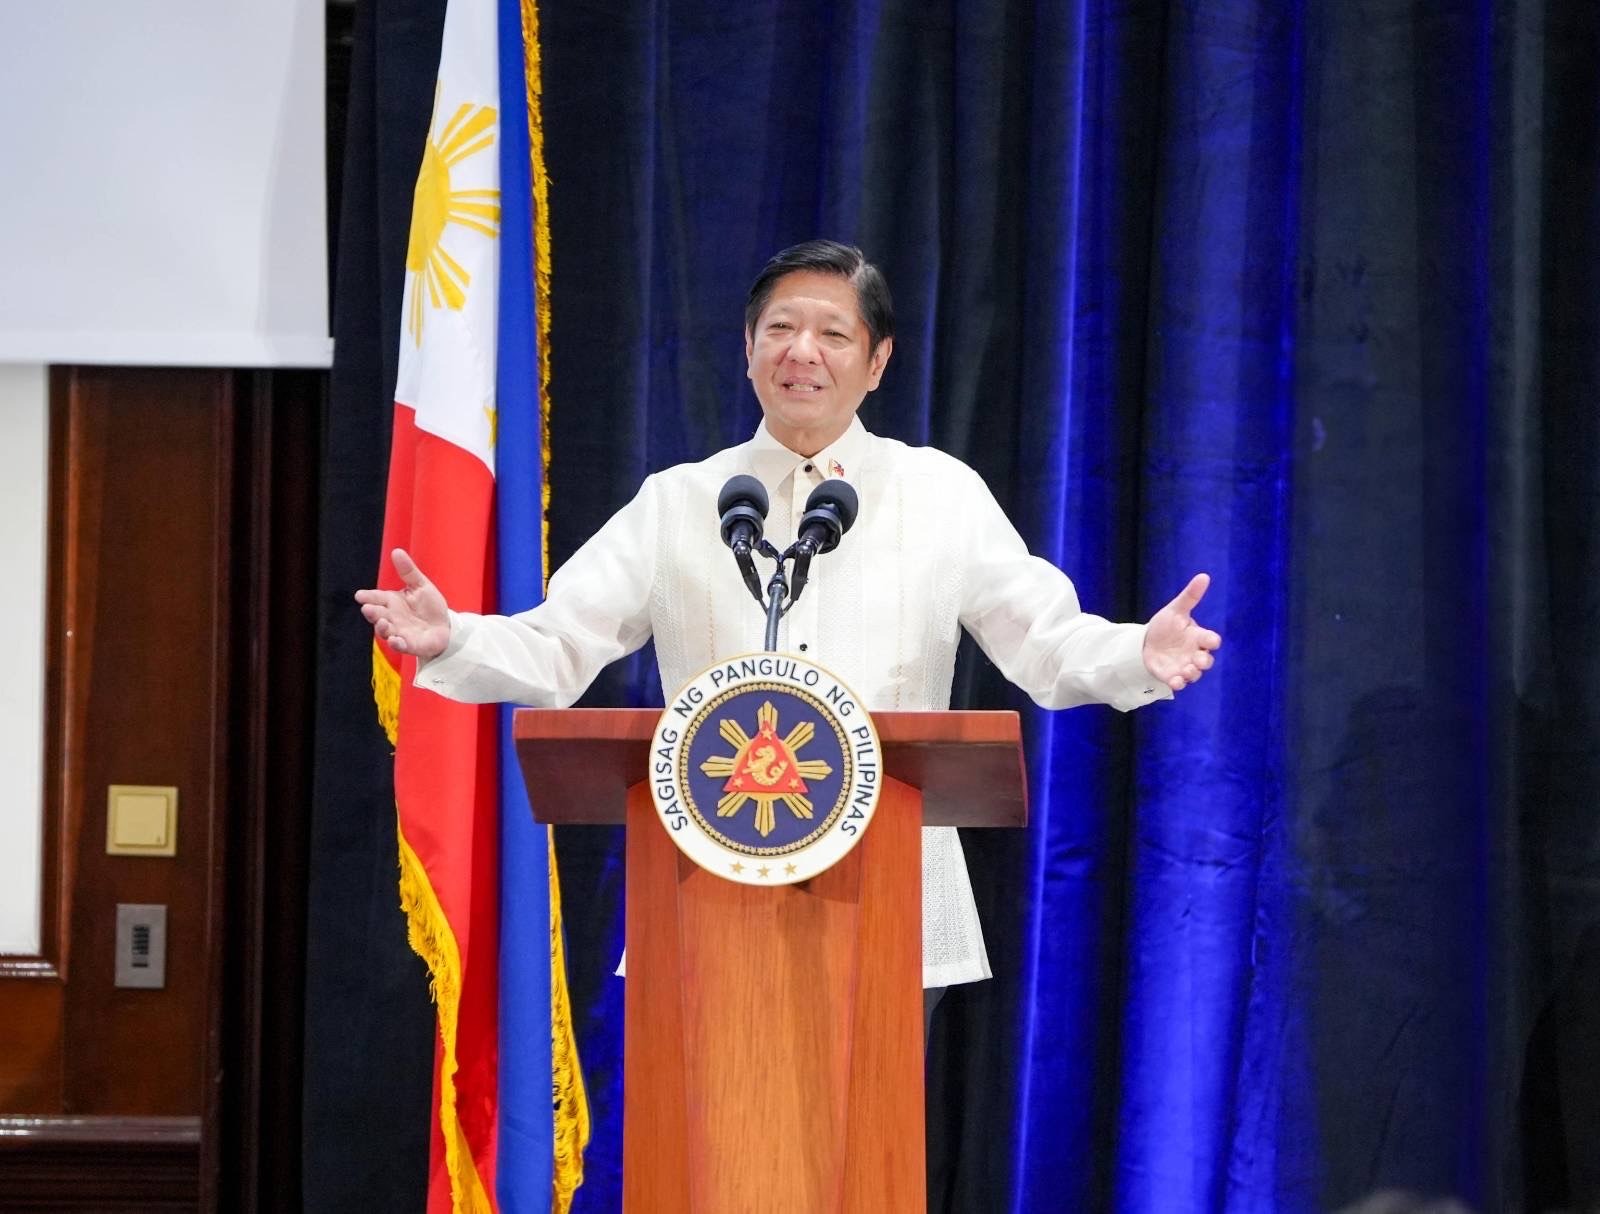 Commander in chief gives P80M to hospital